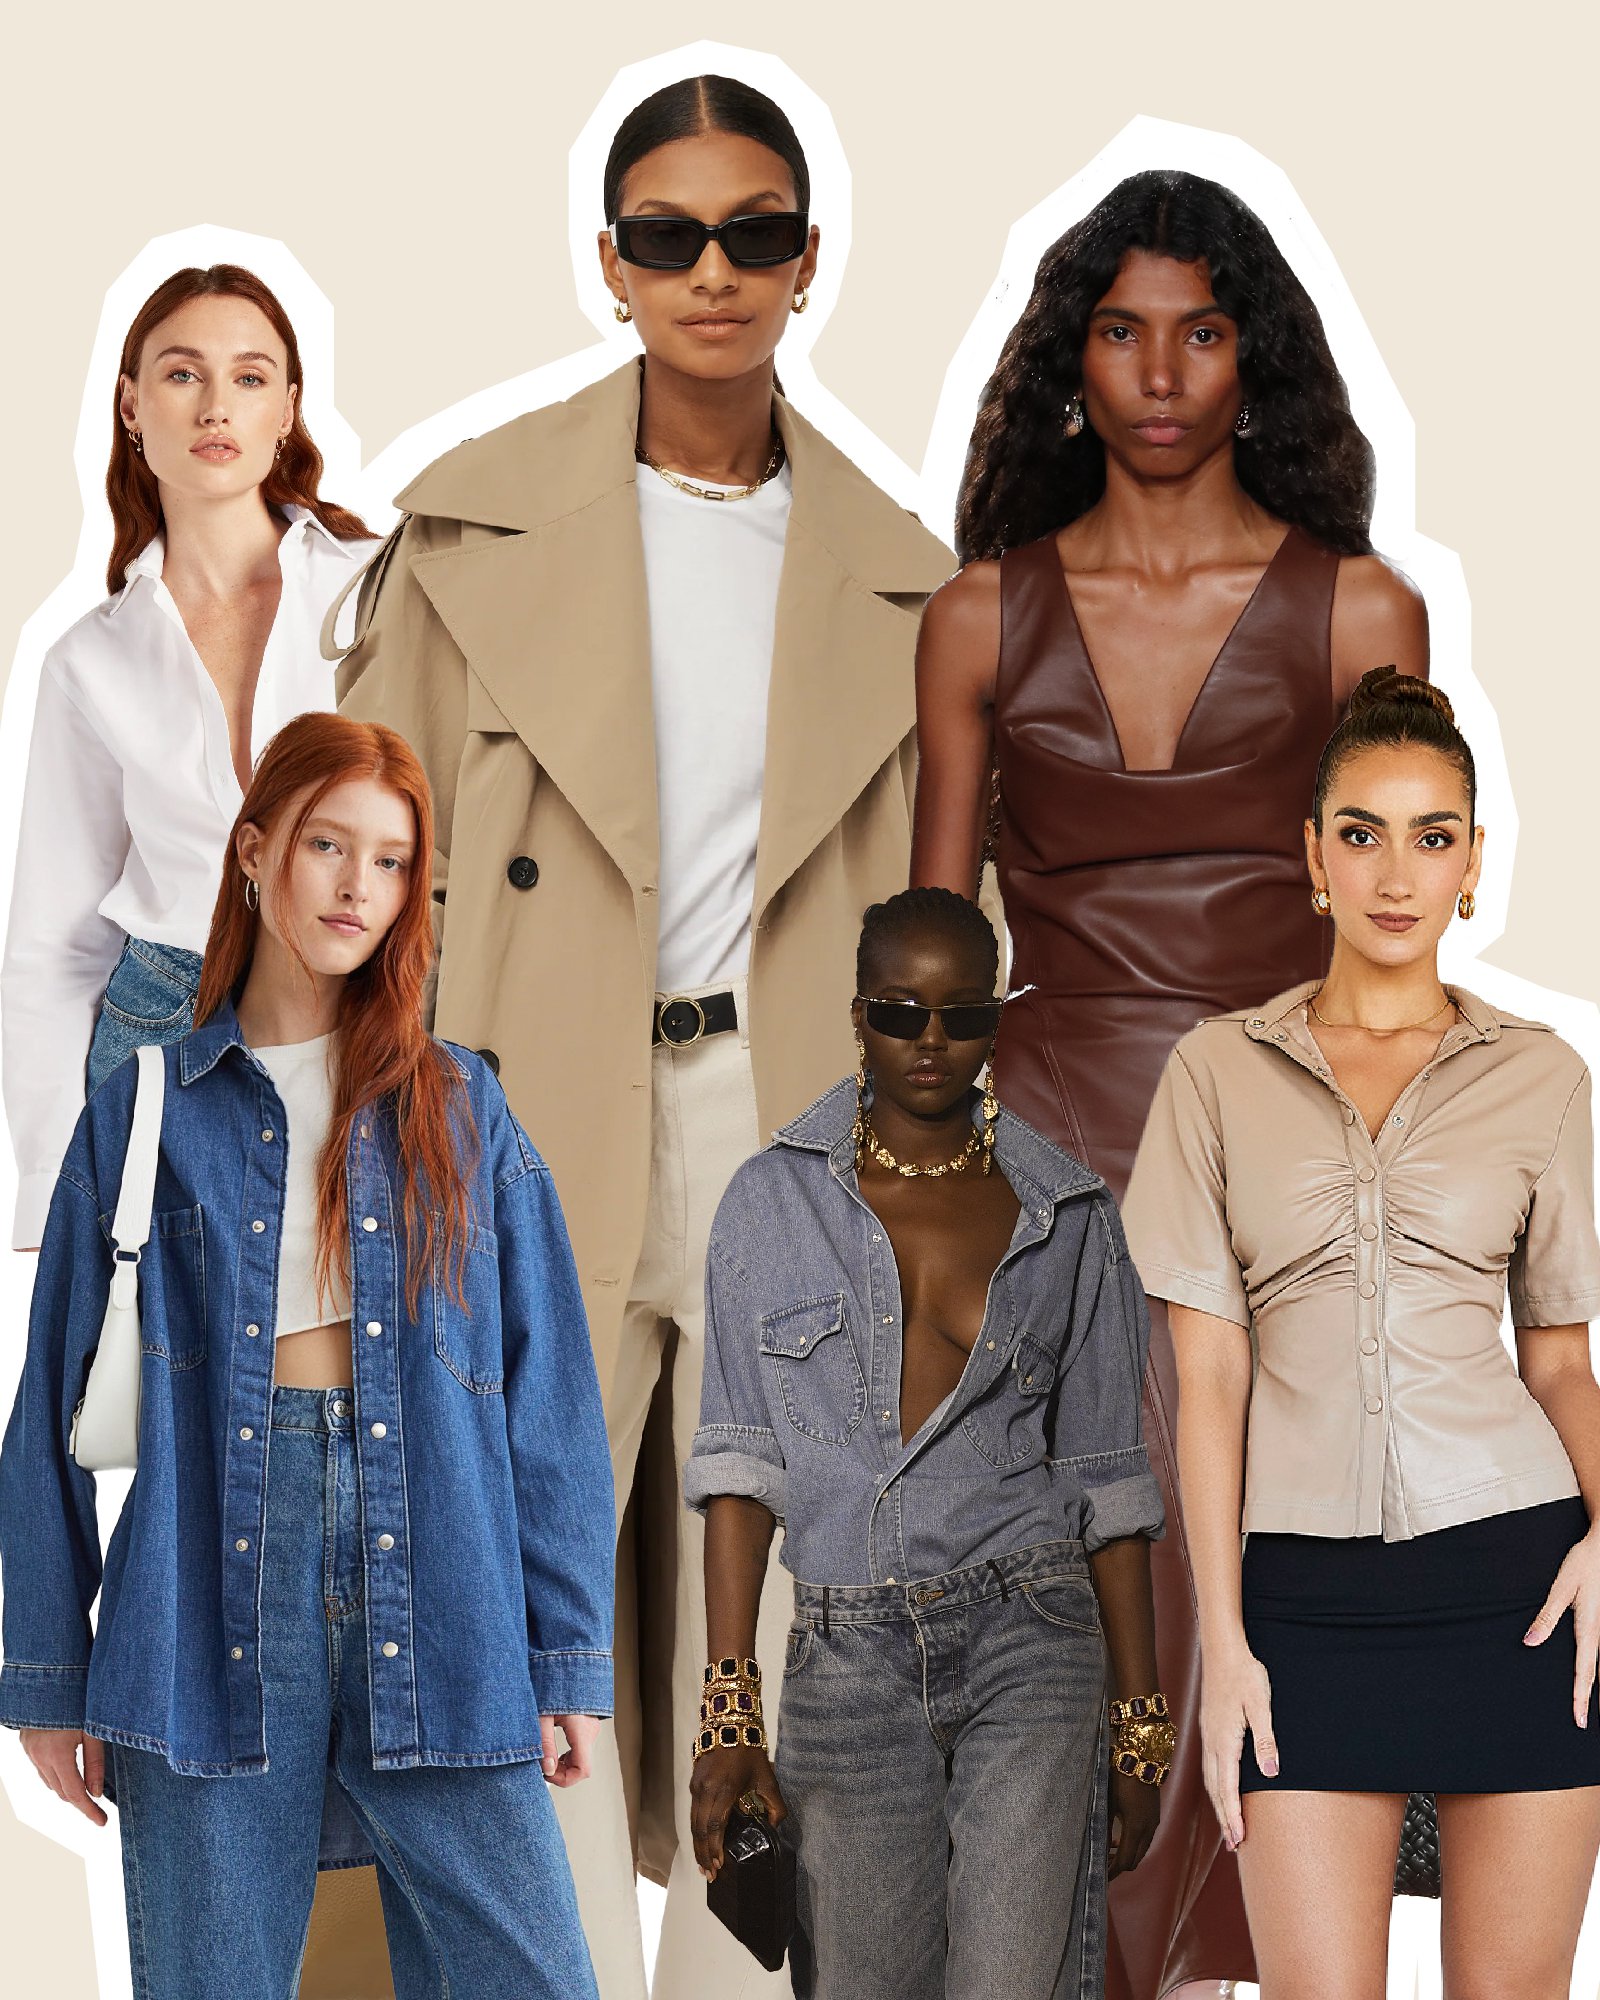 Top 10 Street-Style Trends from Fashion Month Spring/Summer 2023